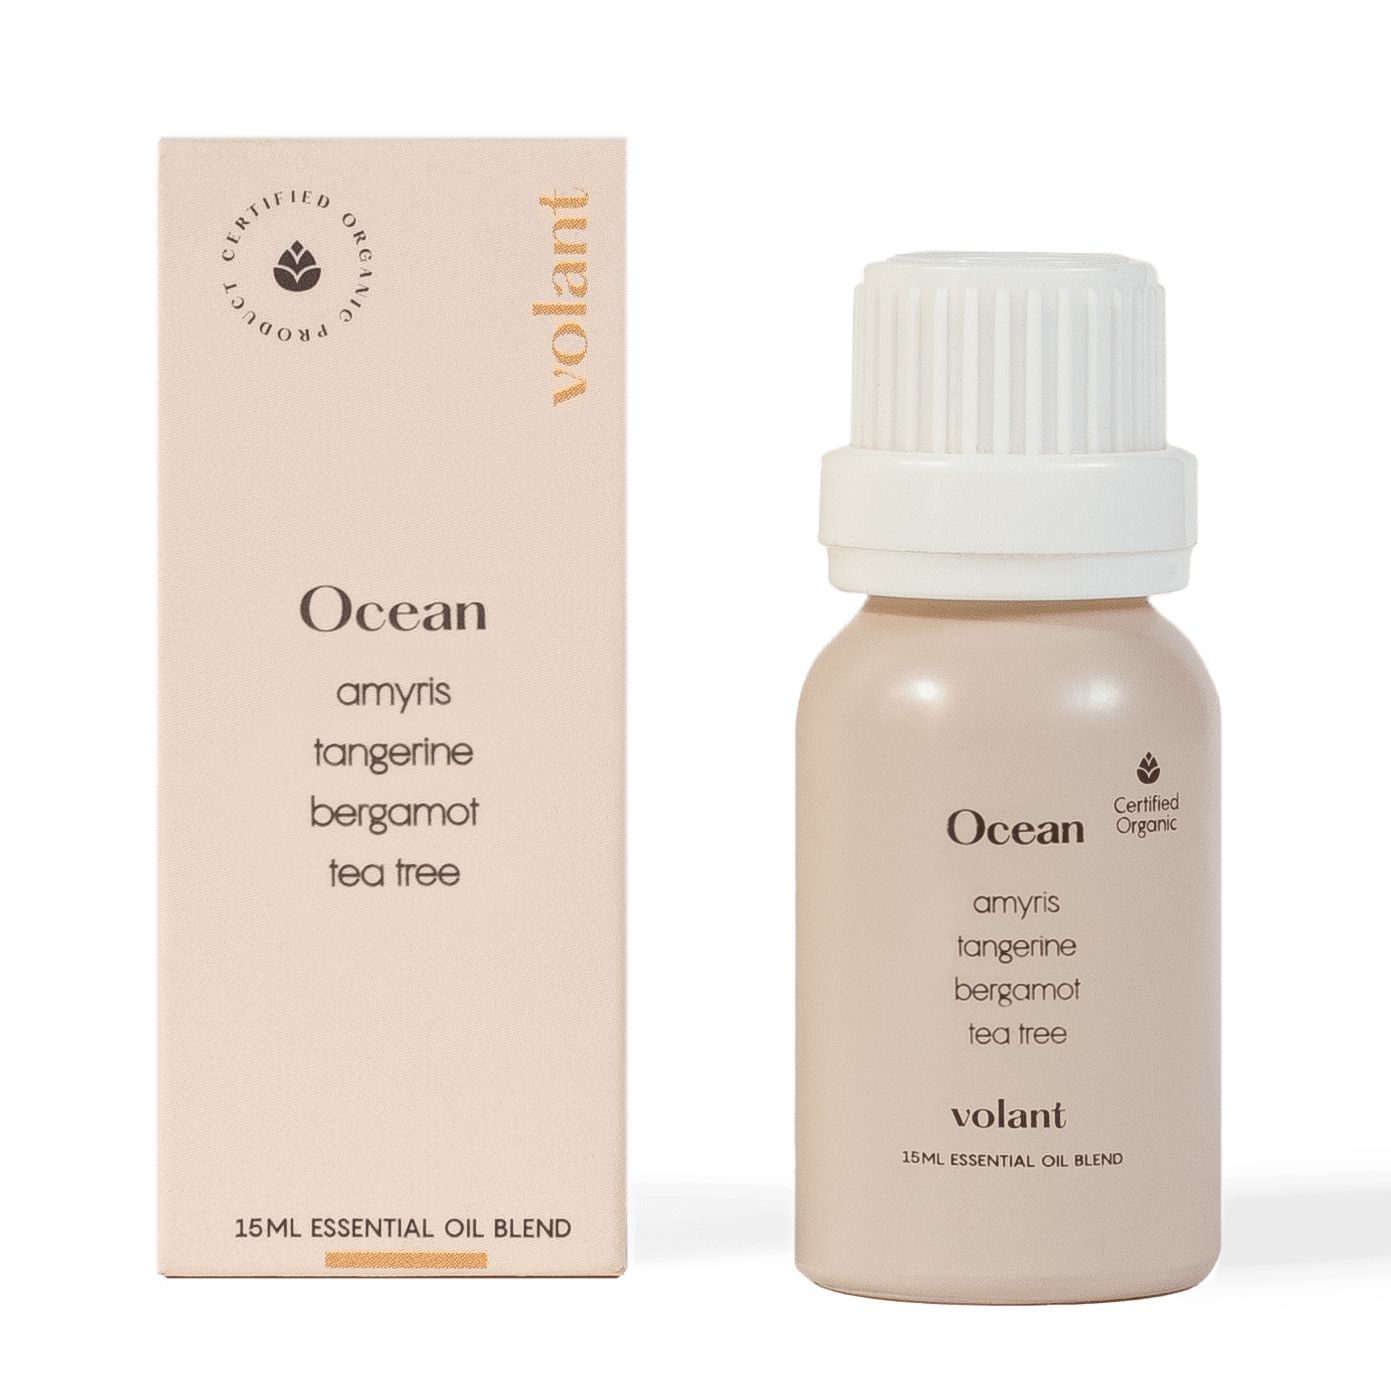 volant ocean essential oil blend bottle packaging made with pure Amyris, Tangerine, Tea Tree, and Bergamot